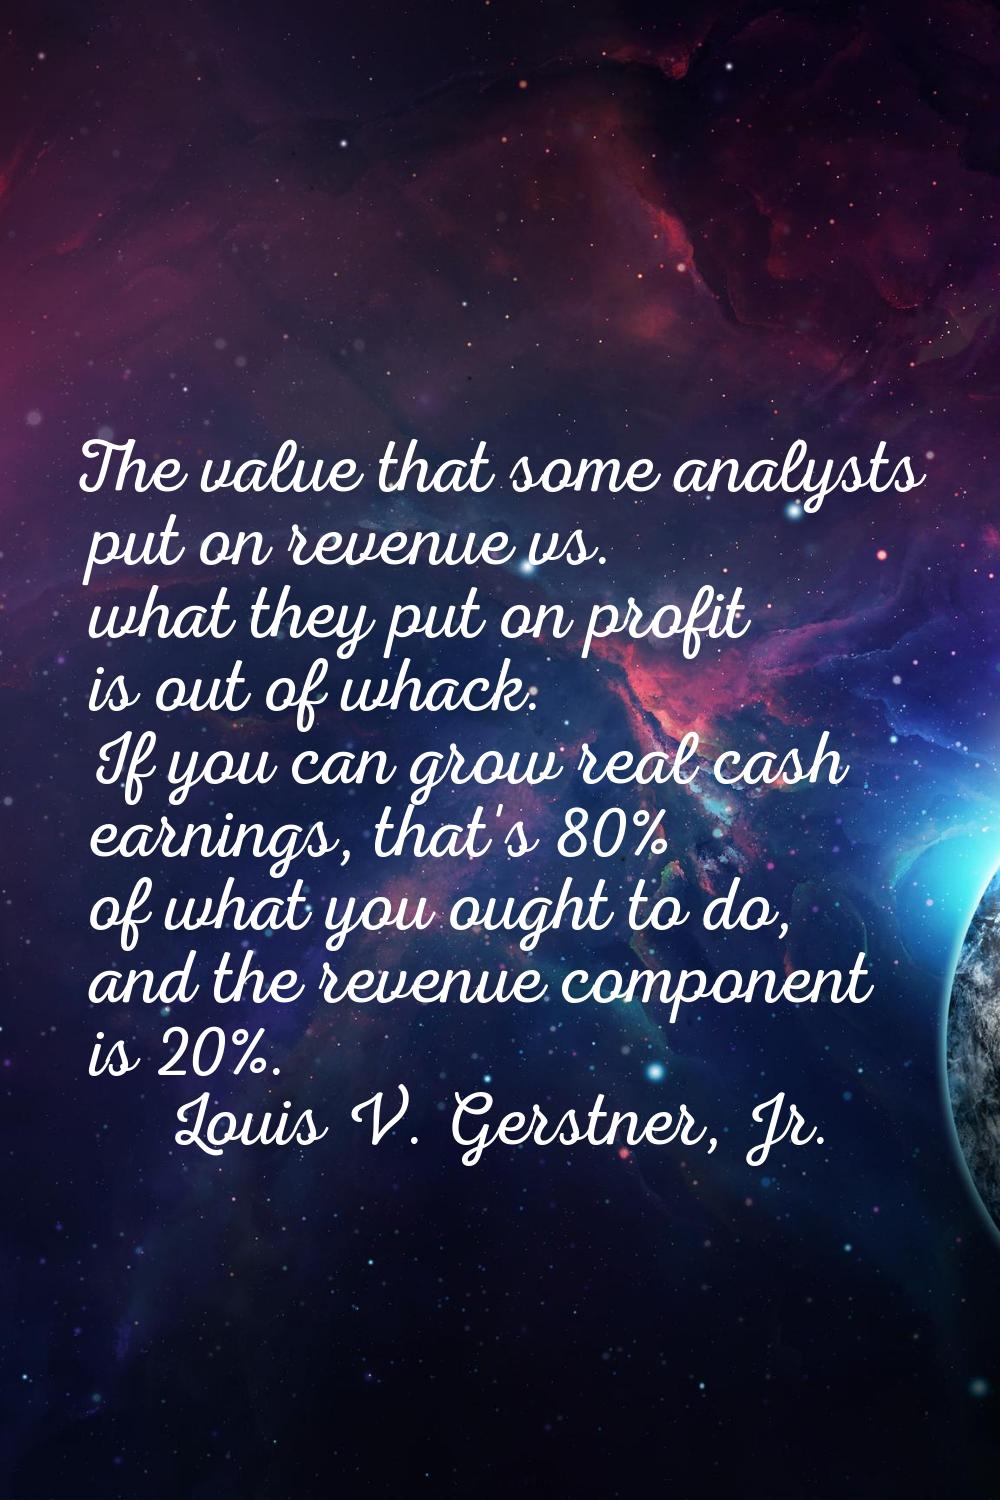 The value that some analysts put on revenue vs. what they put on profit is out of whack. If you can